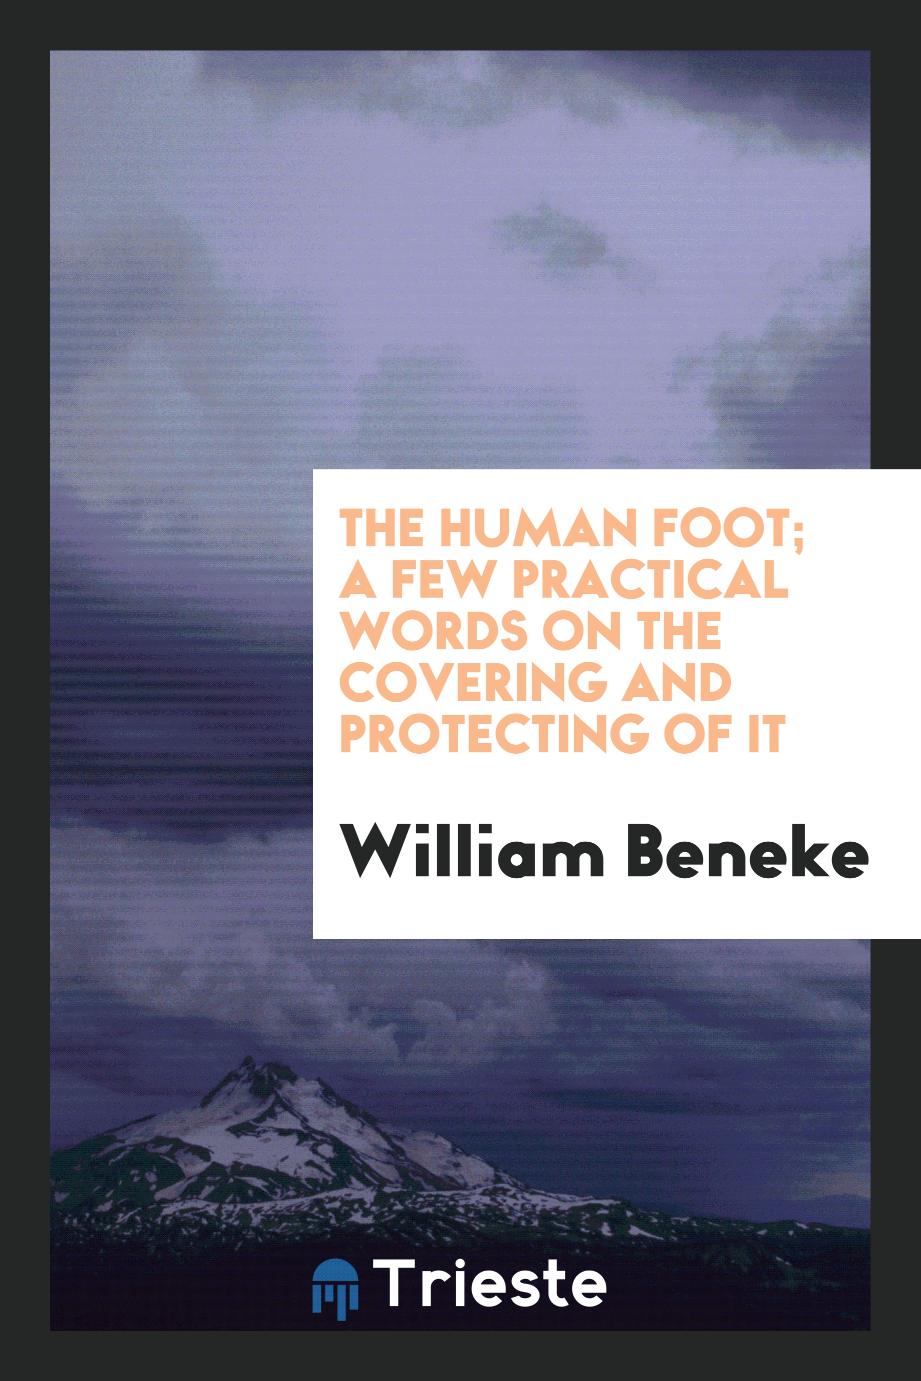 The Human foot; A Few Practical Words on the Covering and Protecting of it